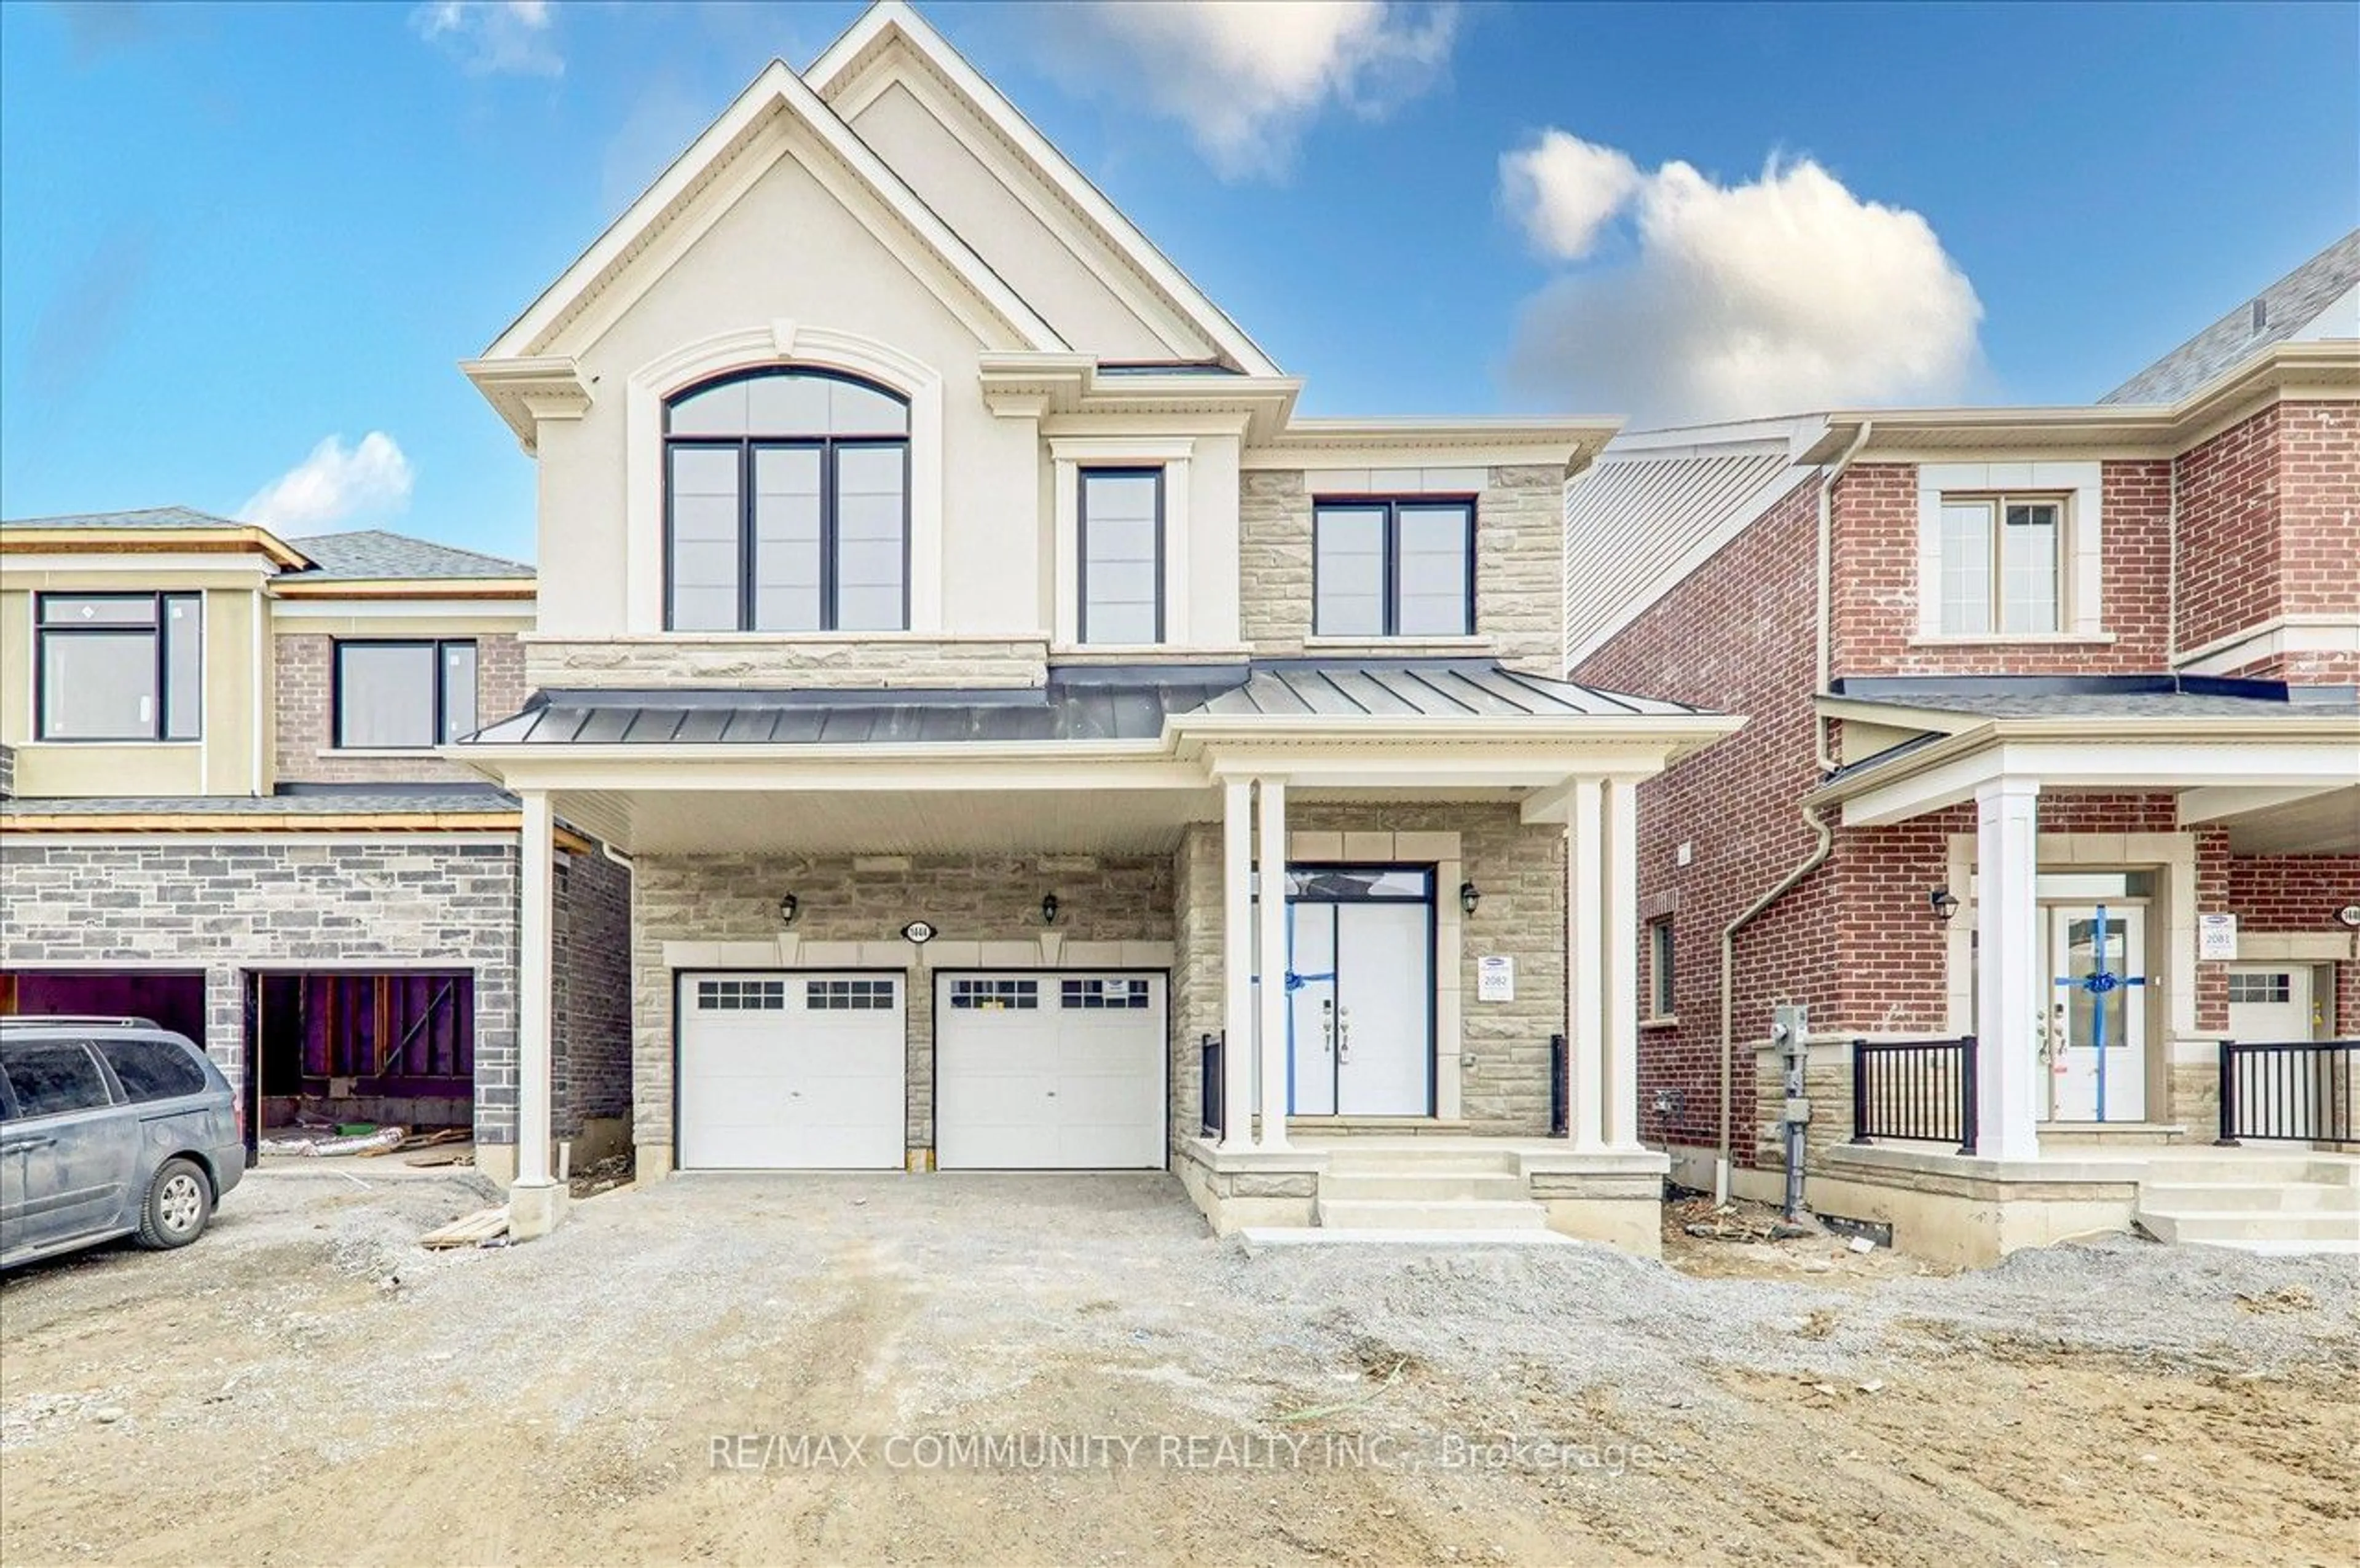 Home with brick exterior material for 1444 Mourning Dove Lane, Pickering Ontario L1X 0N8